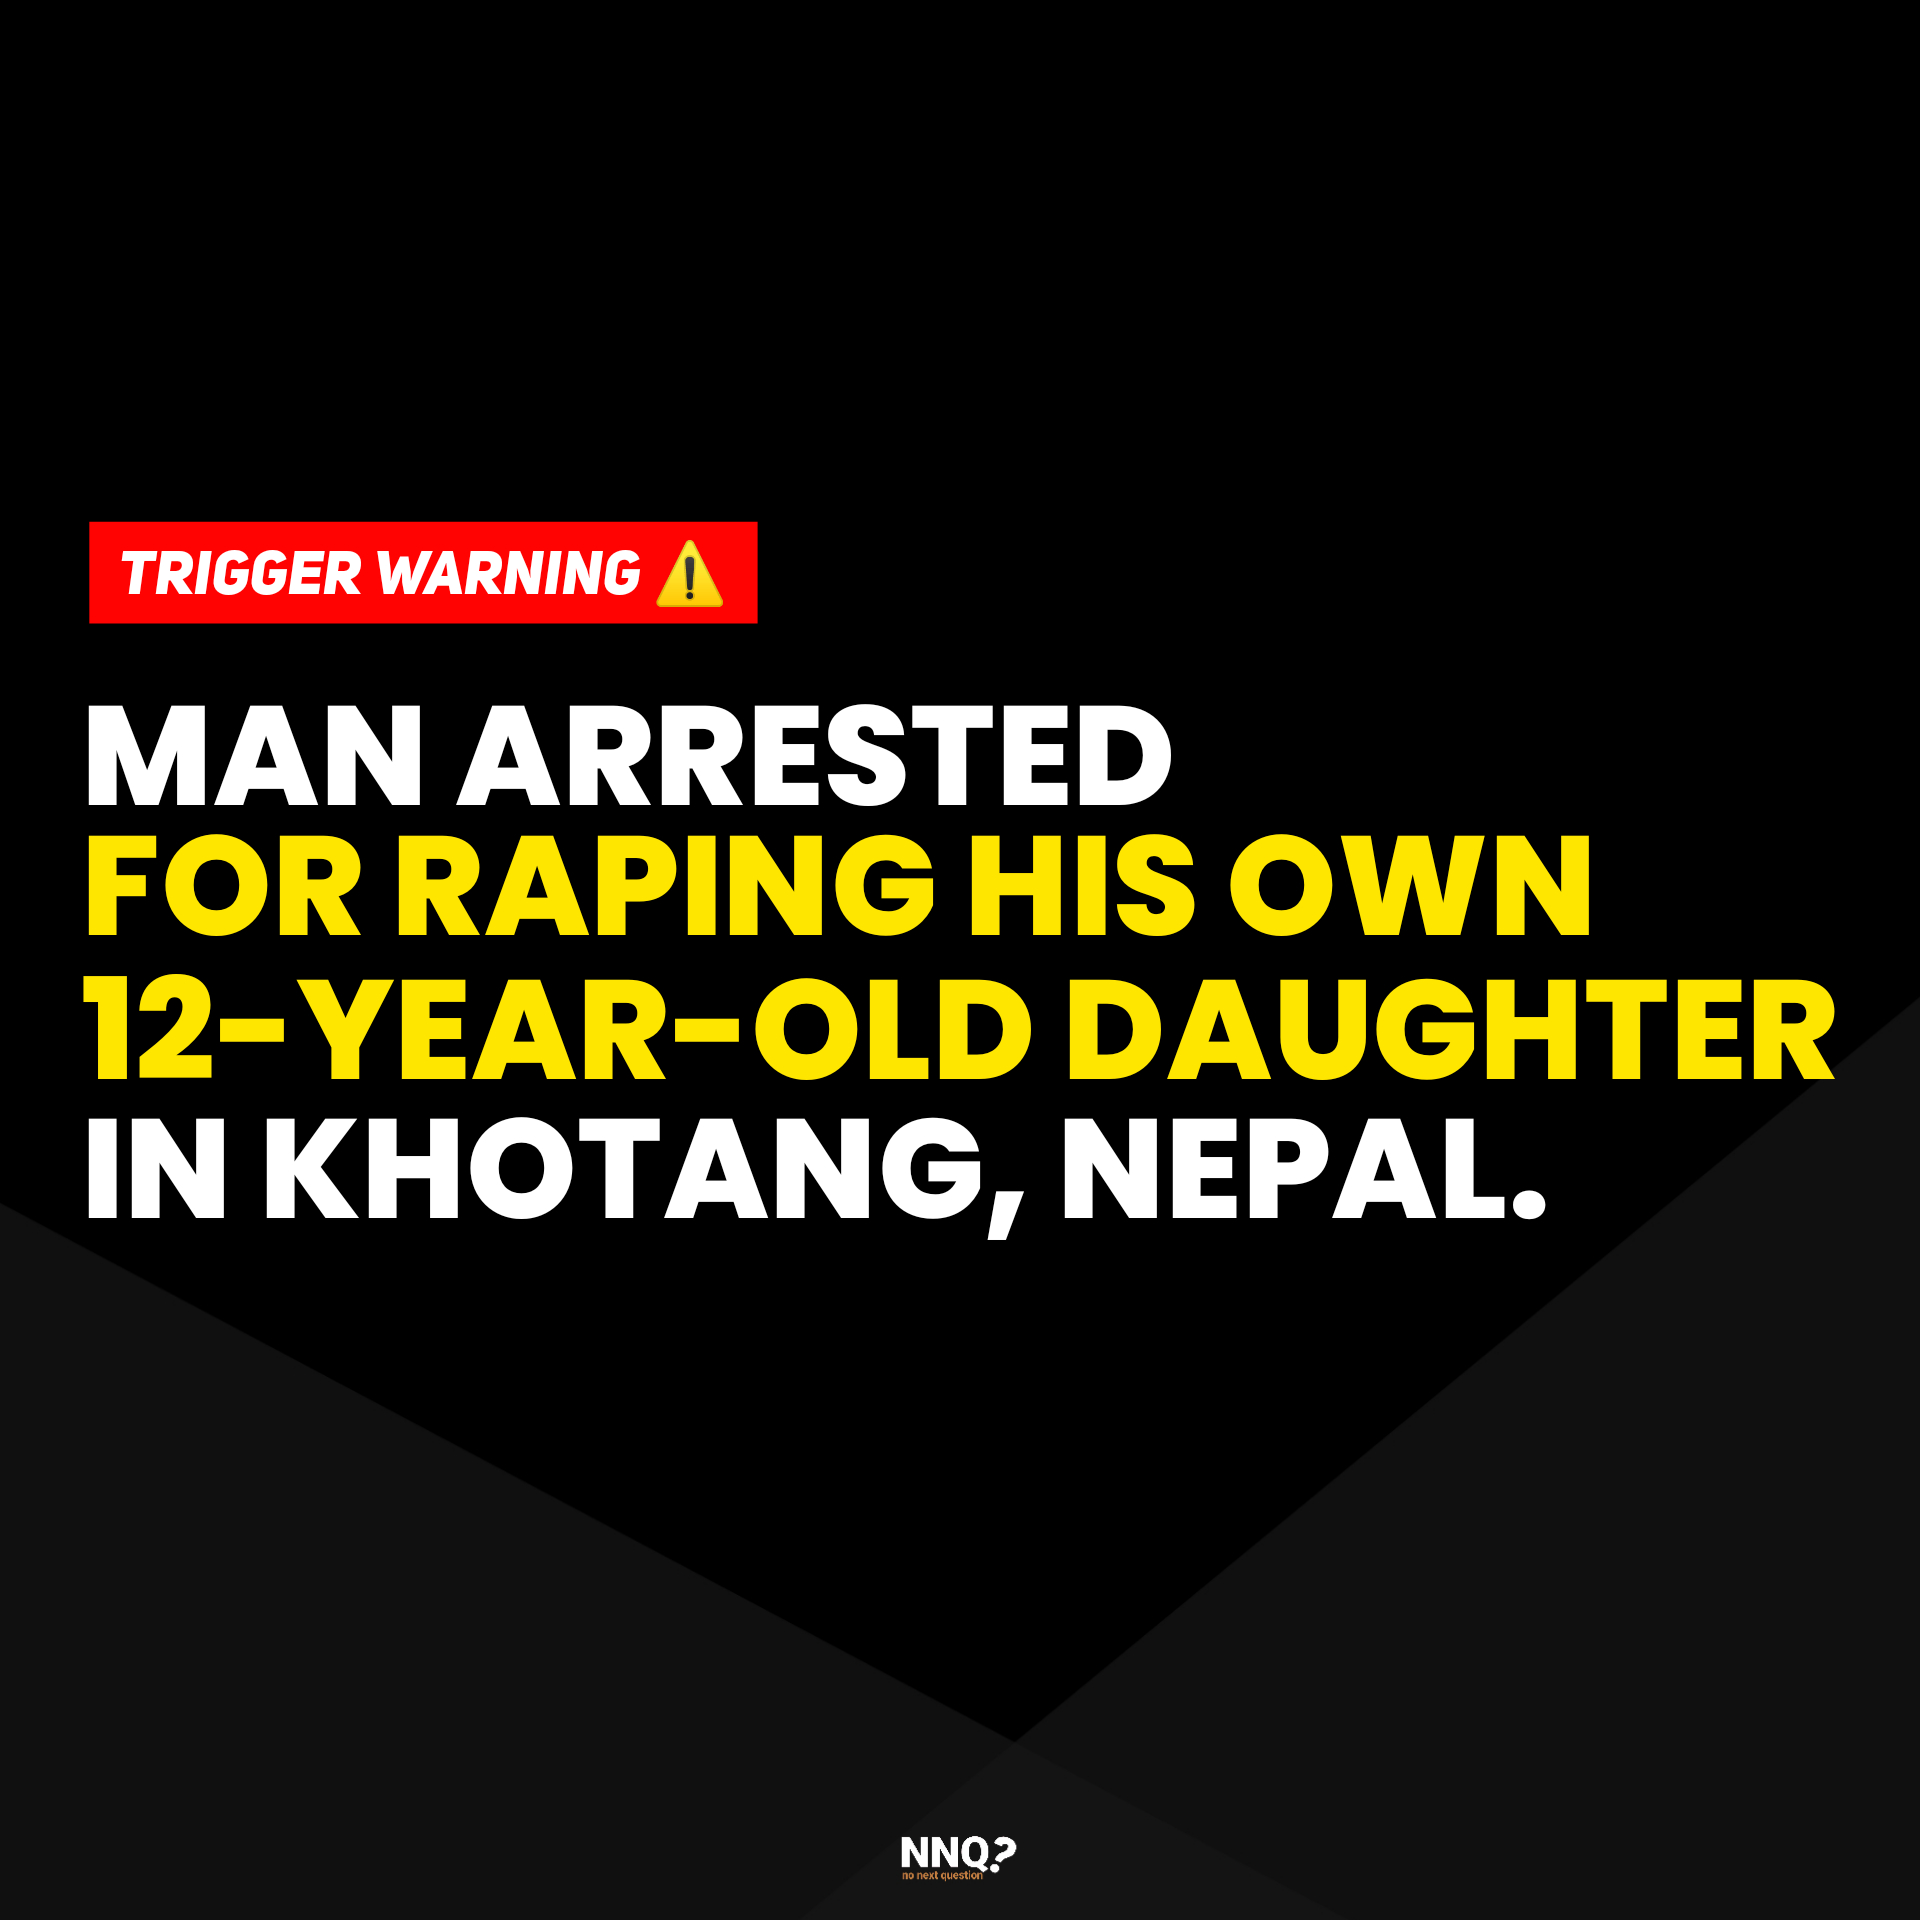 Man arrested for raping his own daughter in Khotang